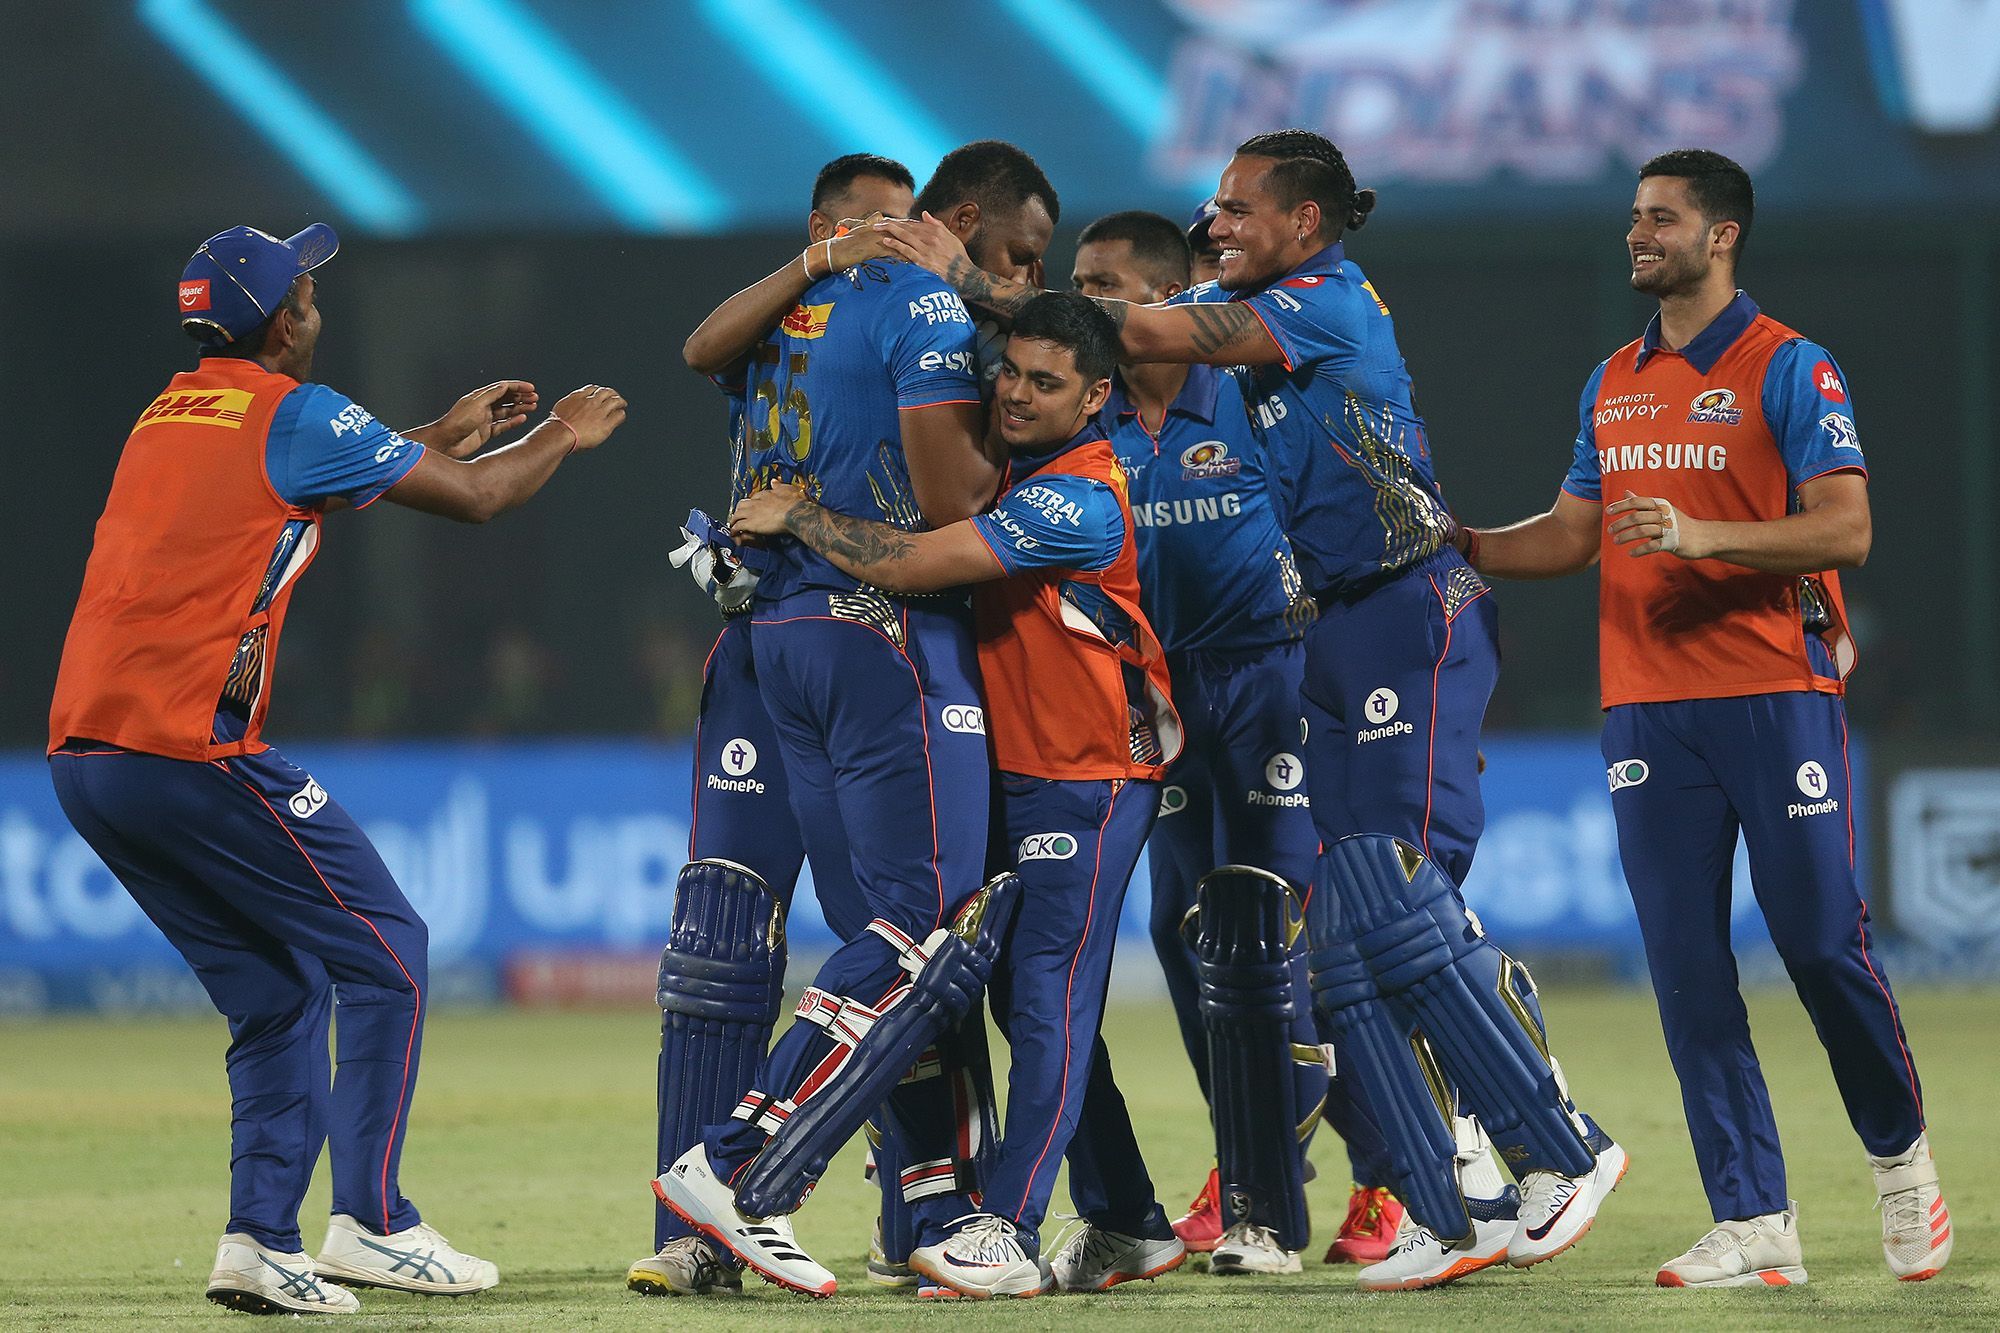 MI won the last match against CSK by 4 wickets | BCCI/IPL